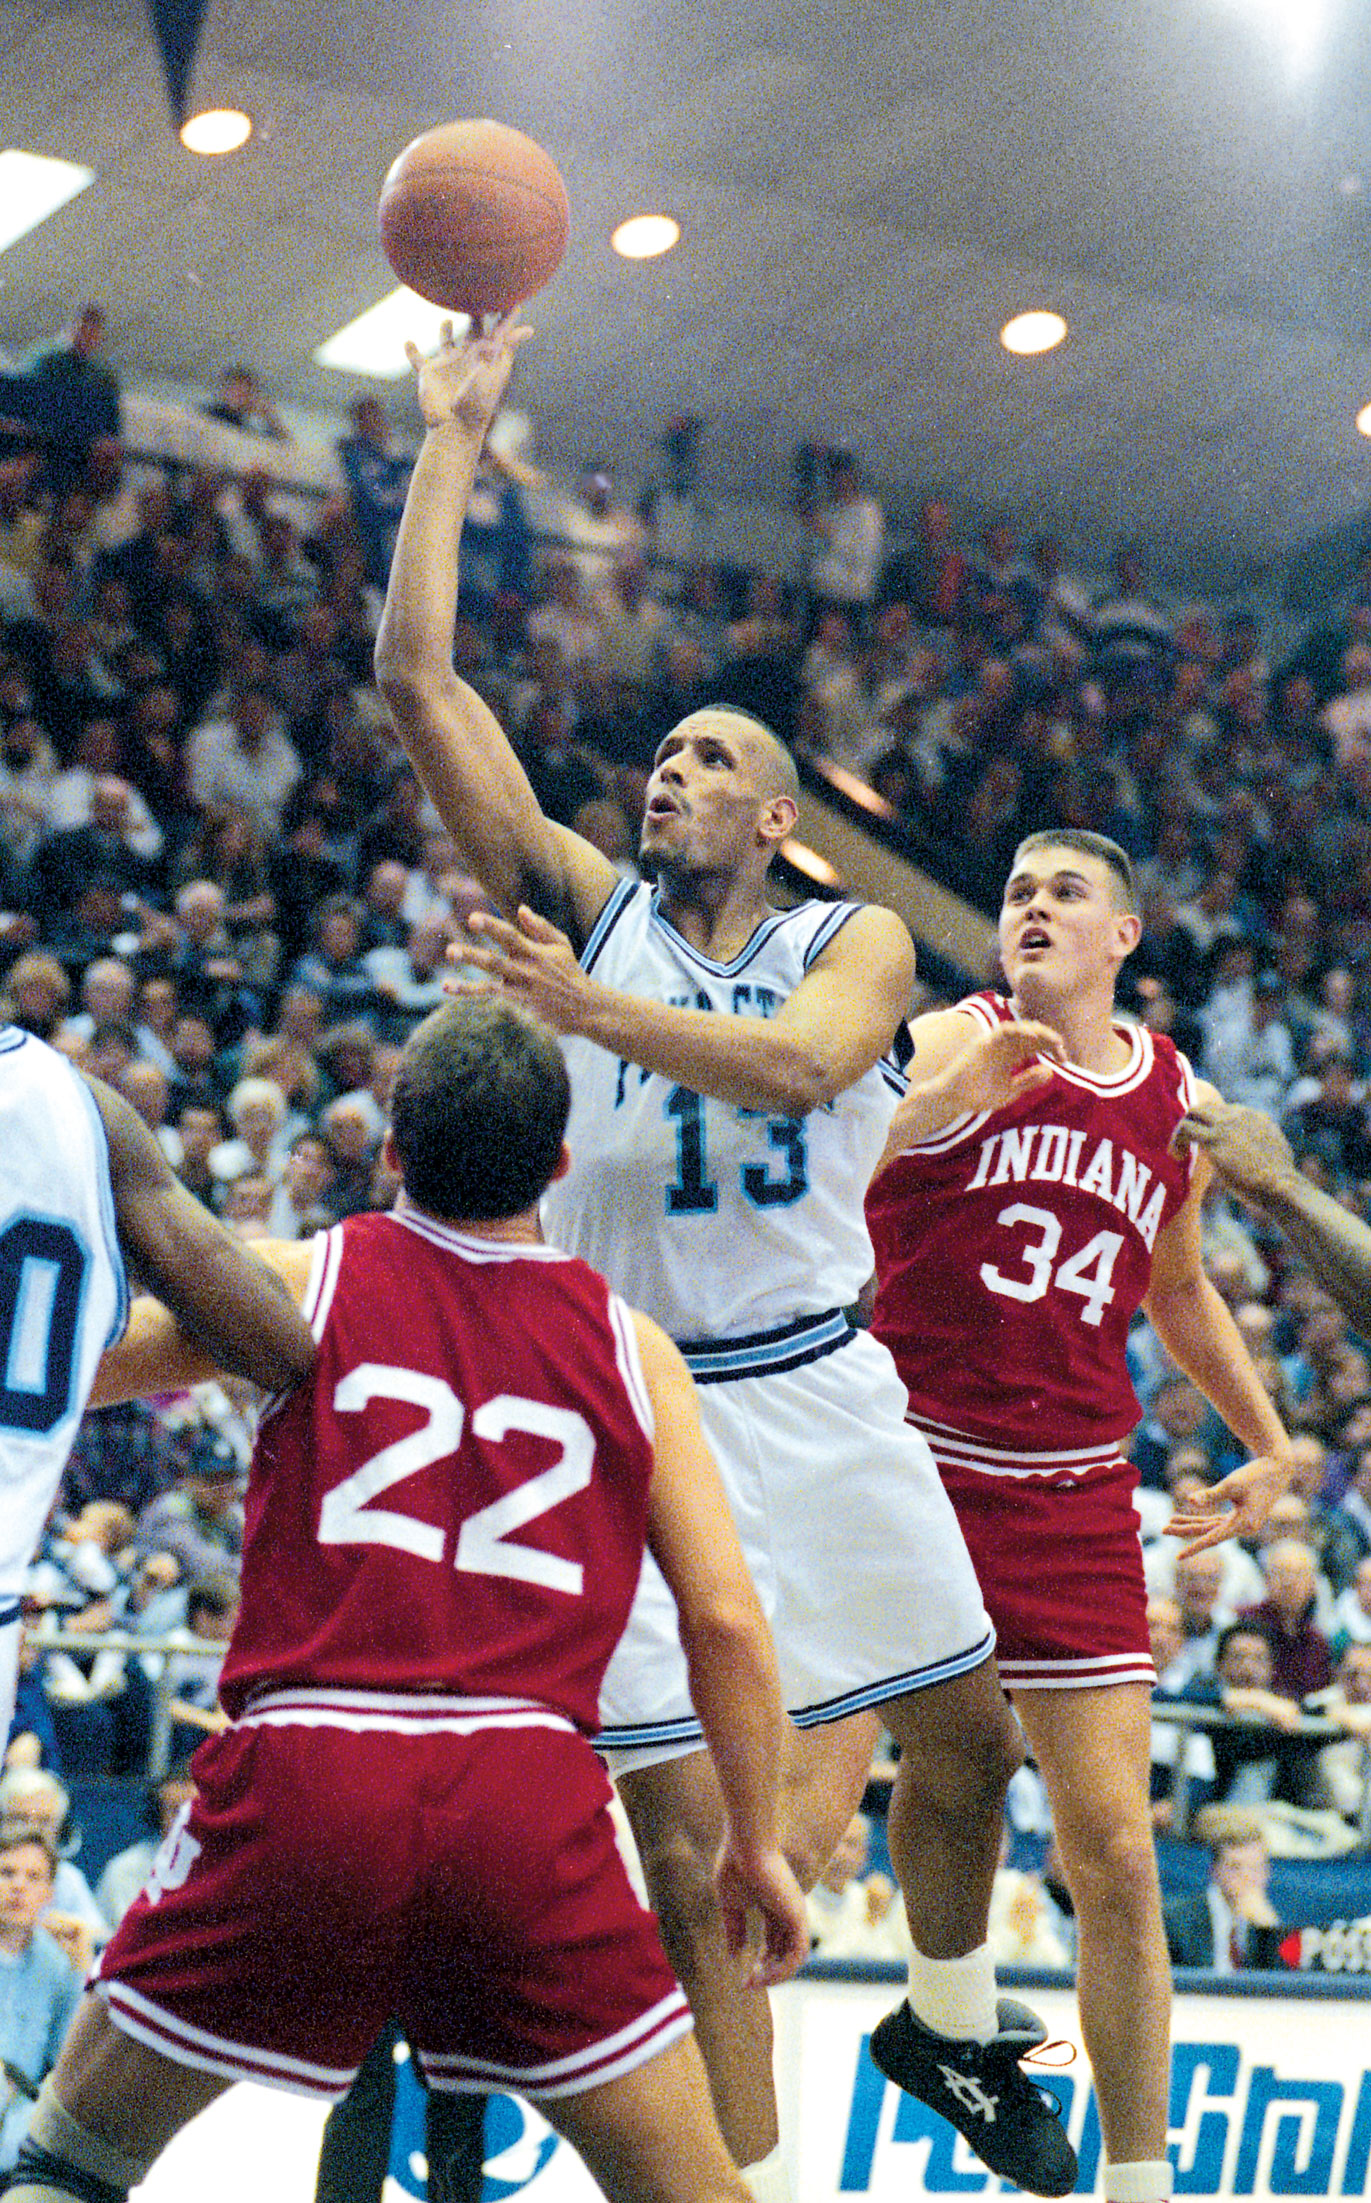 John Amaechi scoring for Penn State, photo by Centre Daily Times